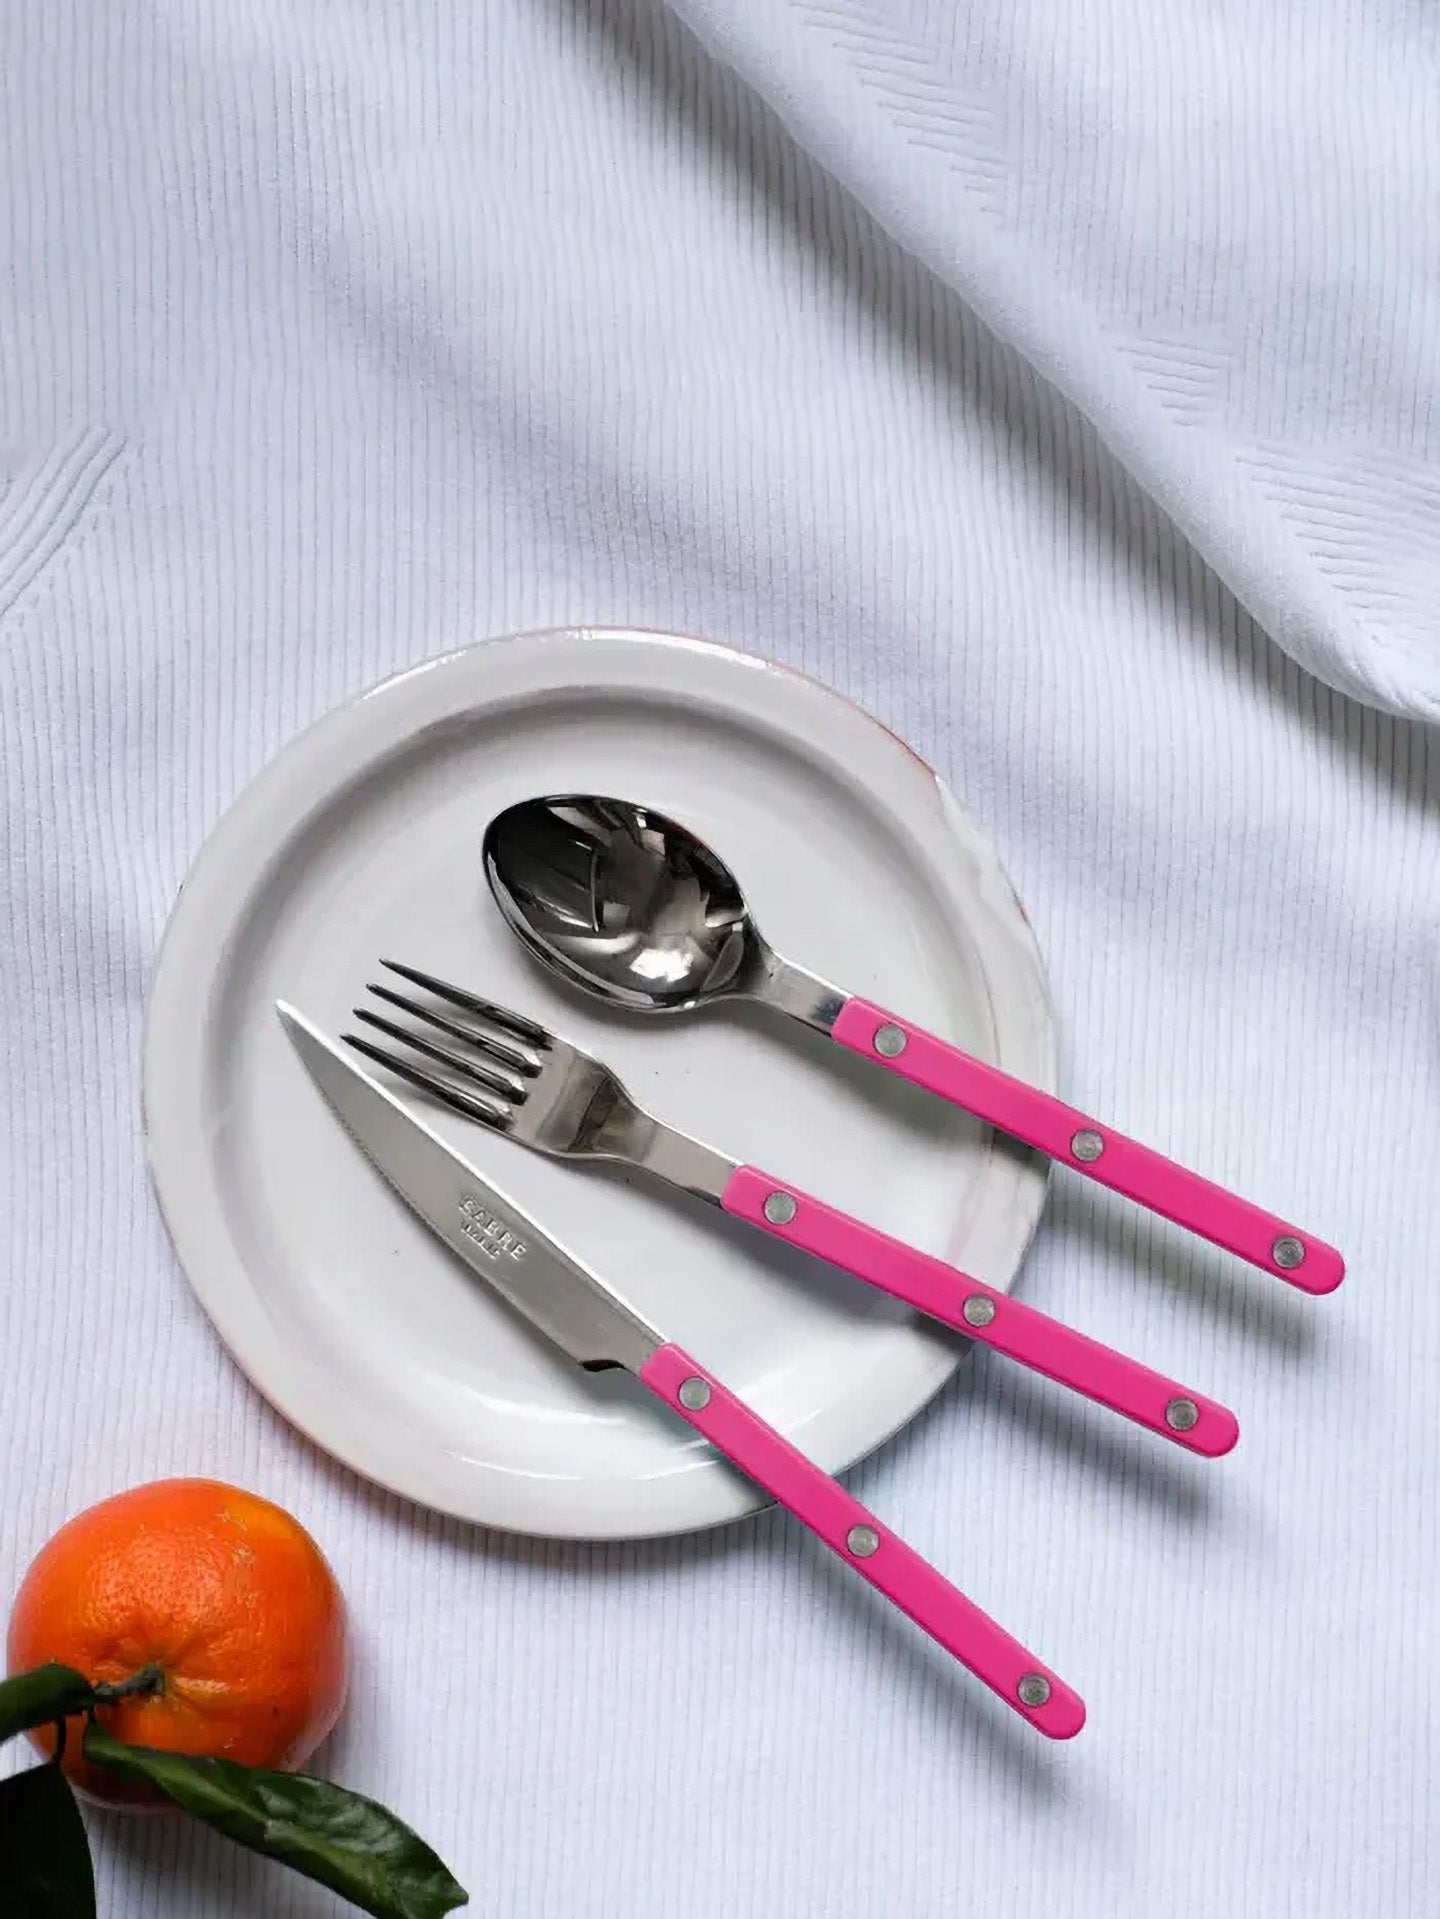 The acrylic handle is decorated with stainless steel rivets. The raspberry pink Bistro dinner forks are easy to clean in a dishwasher.